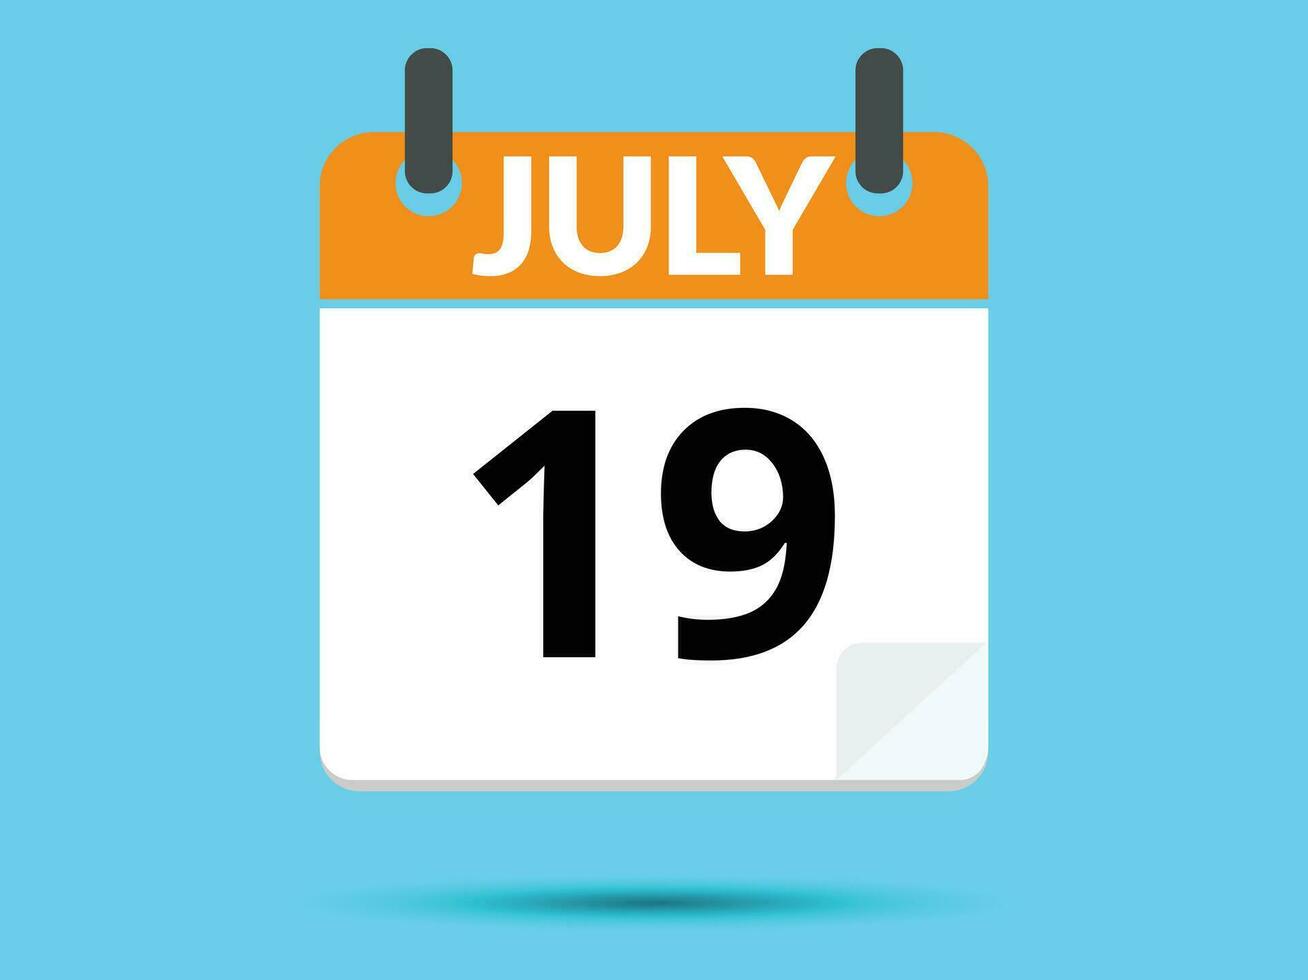 19 July. Flat icon calendar isolated on blue background. Vector illustration.